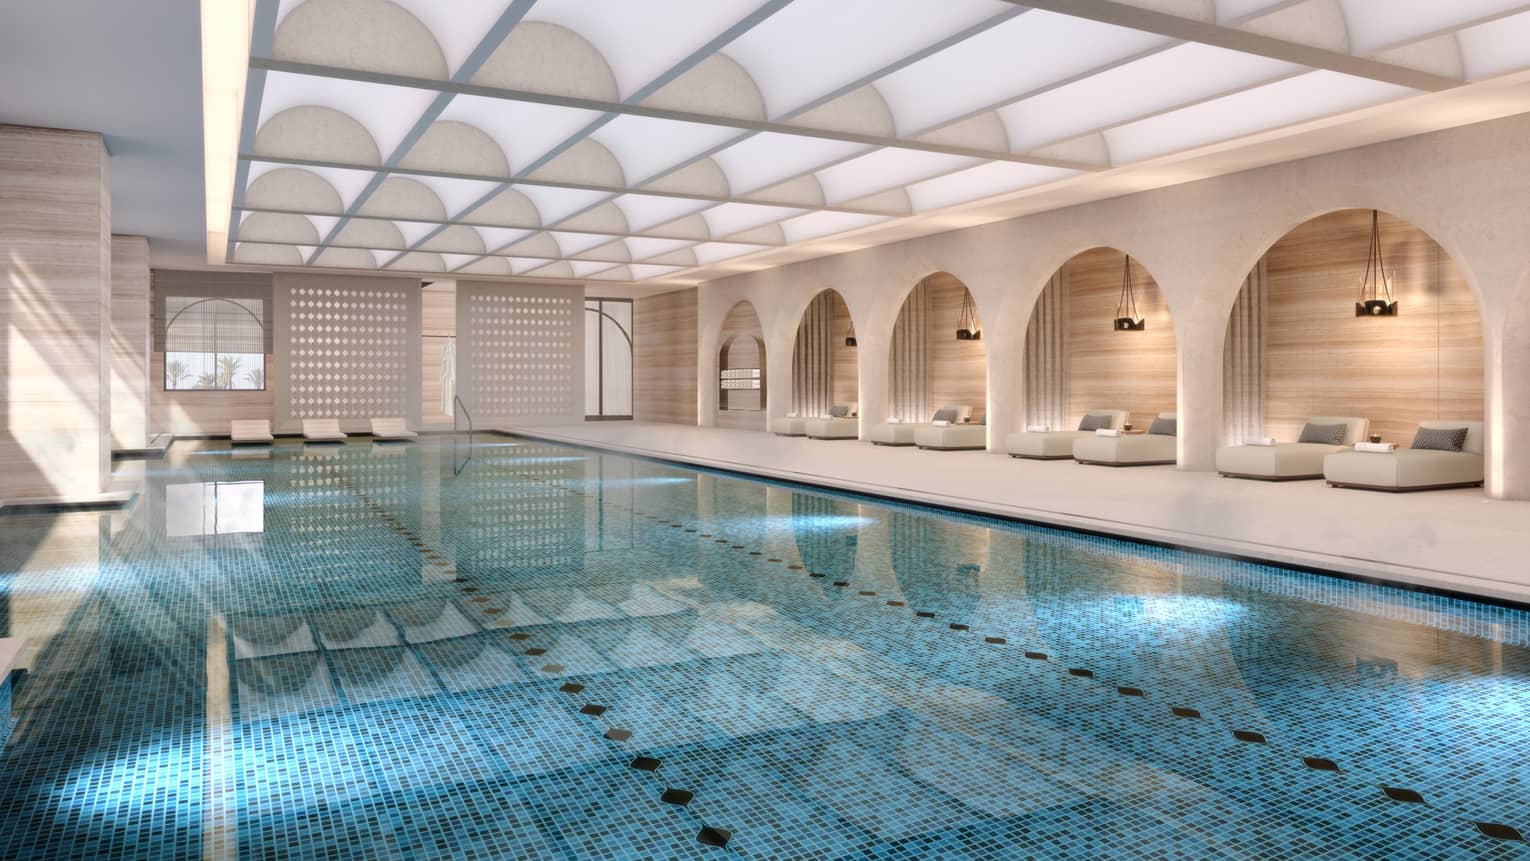 Indoor pool with daybeds lining the wall